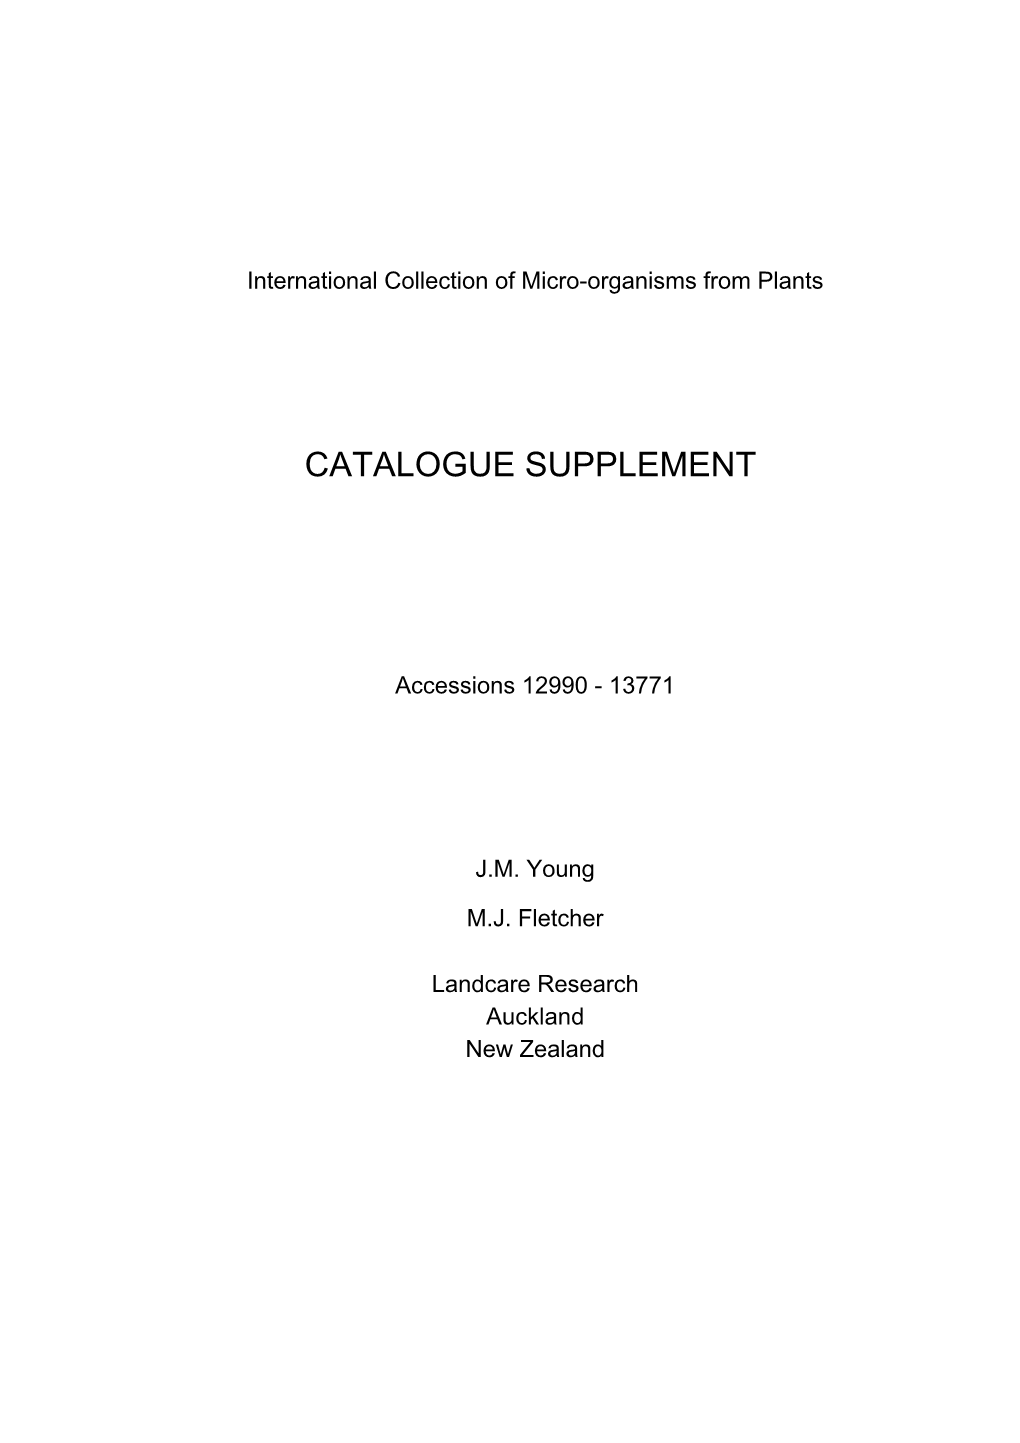 International Collection of Micro-Organisms from Plants